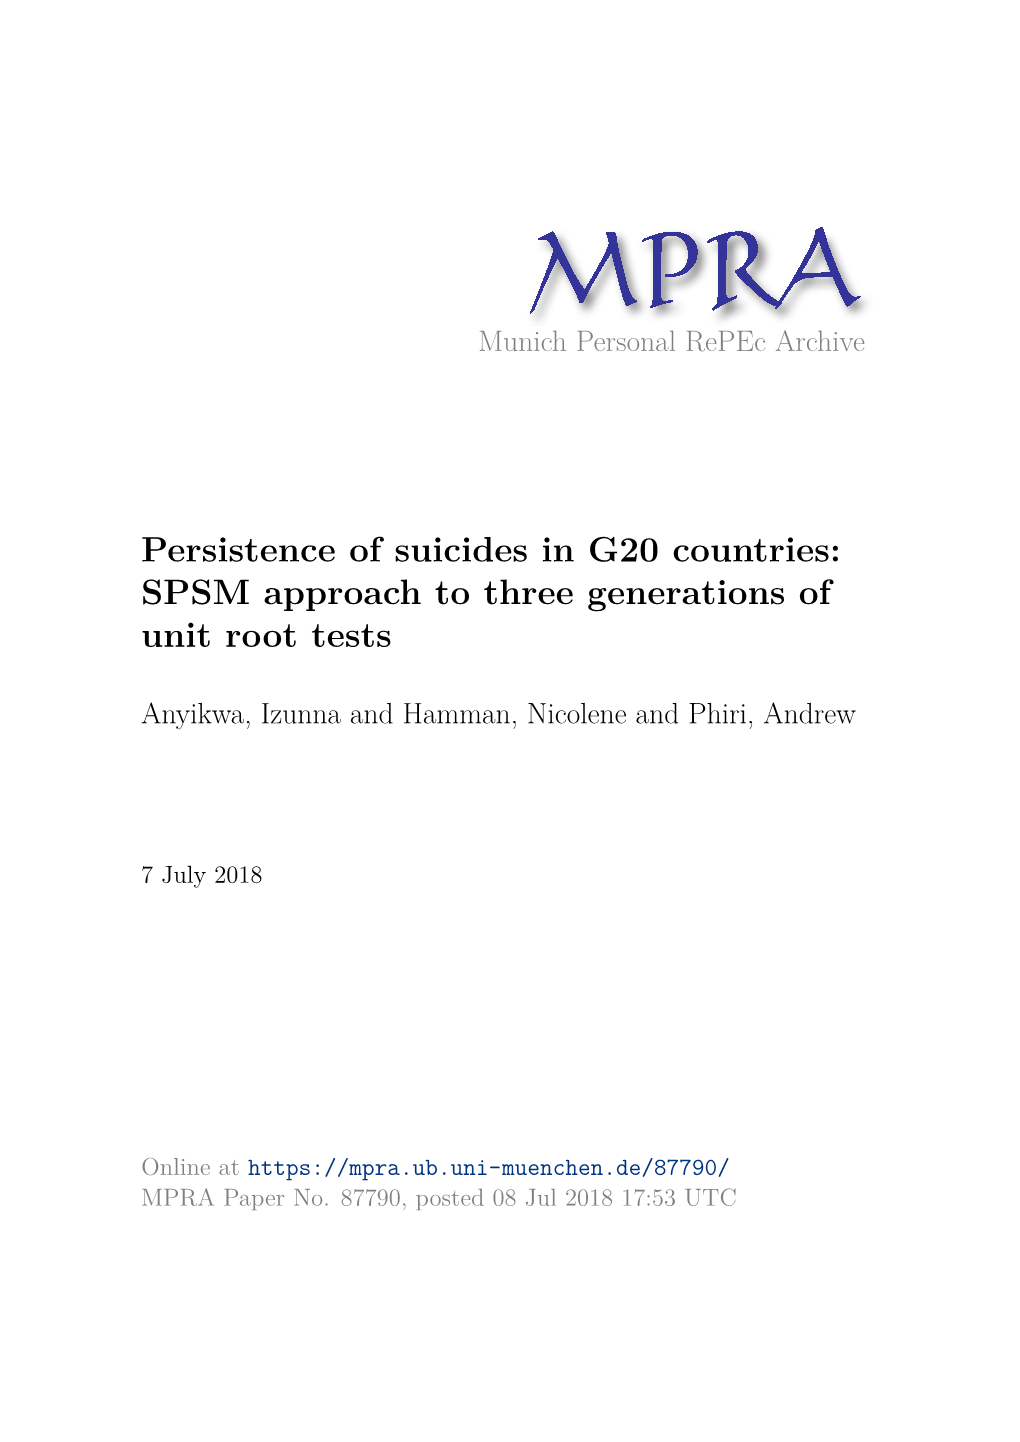 Persistence of Suicides in G20 Countries: SPSM Approach to Three Generations of Unit Root Tests